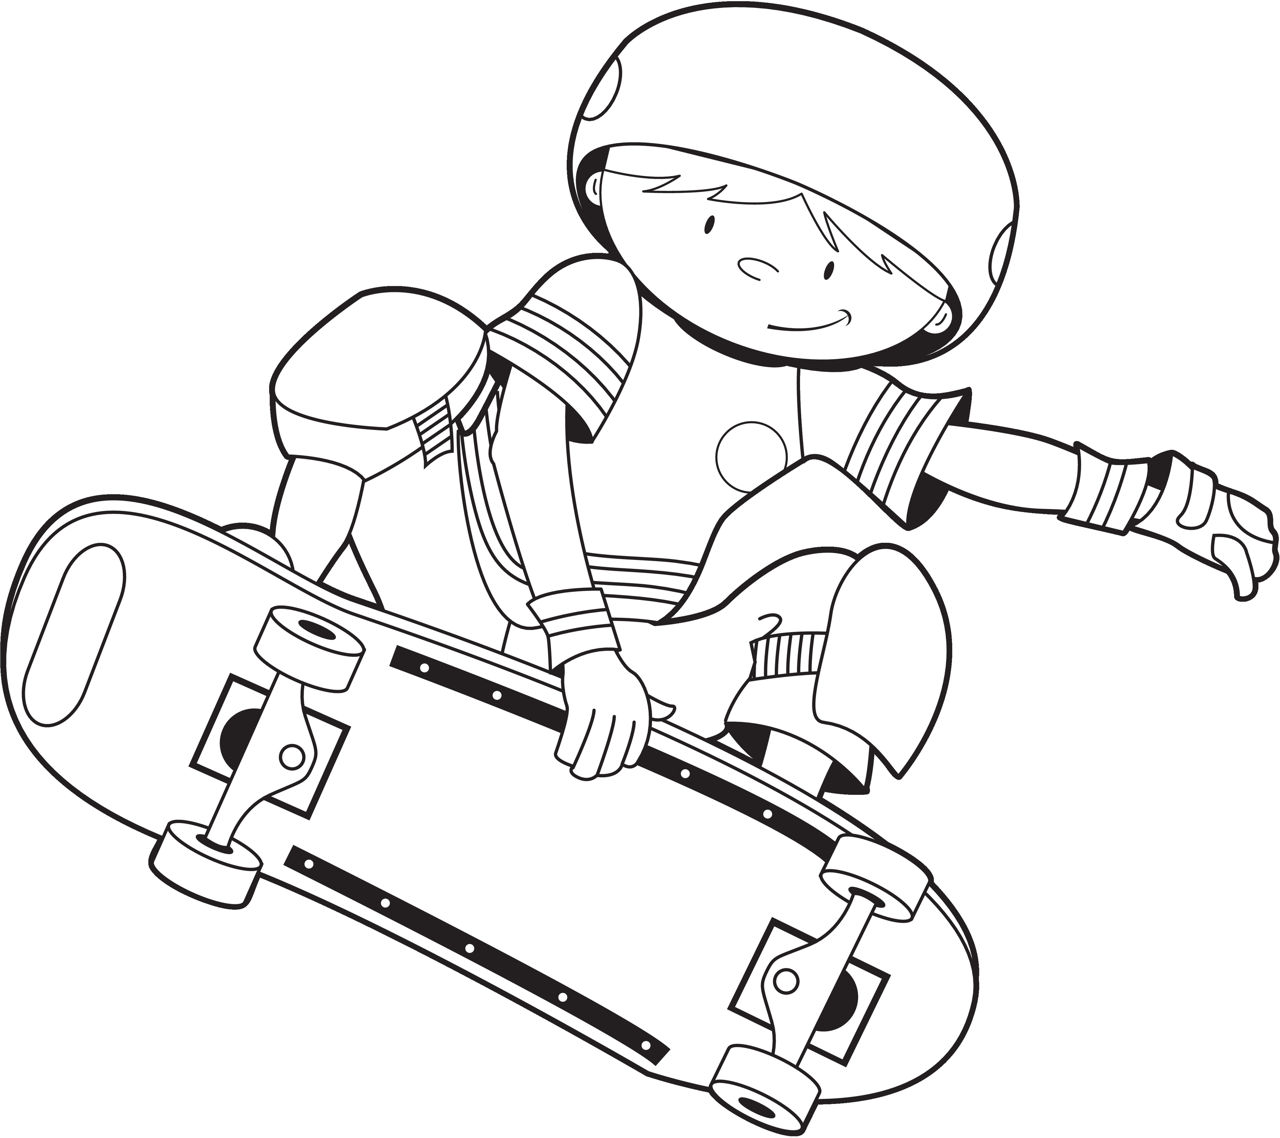  Cool Coloring Pages For Boys 1